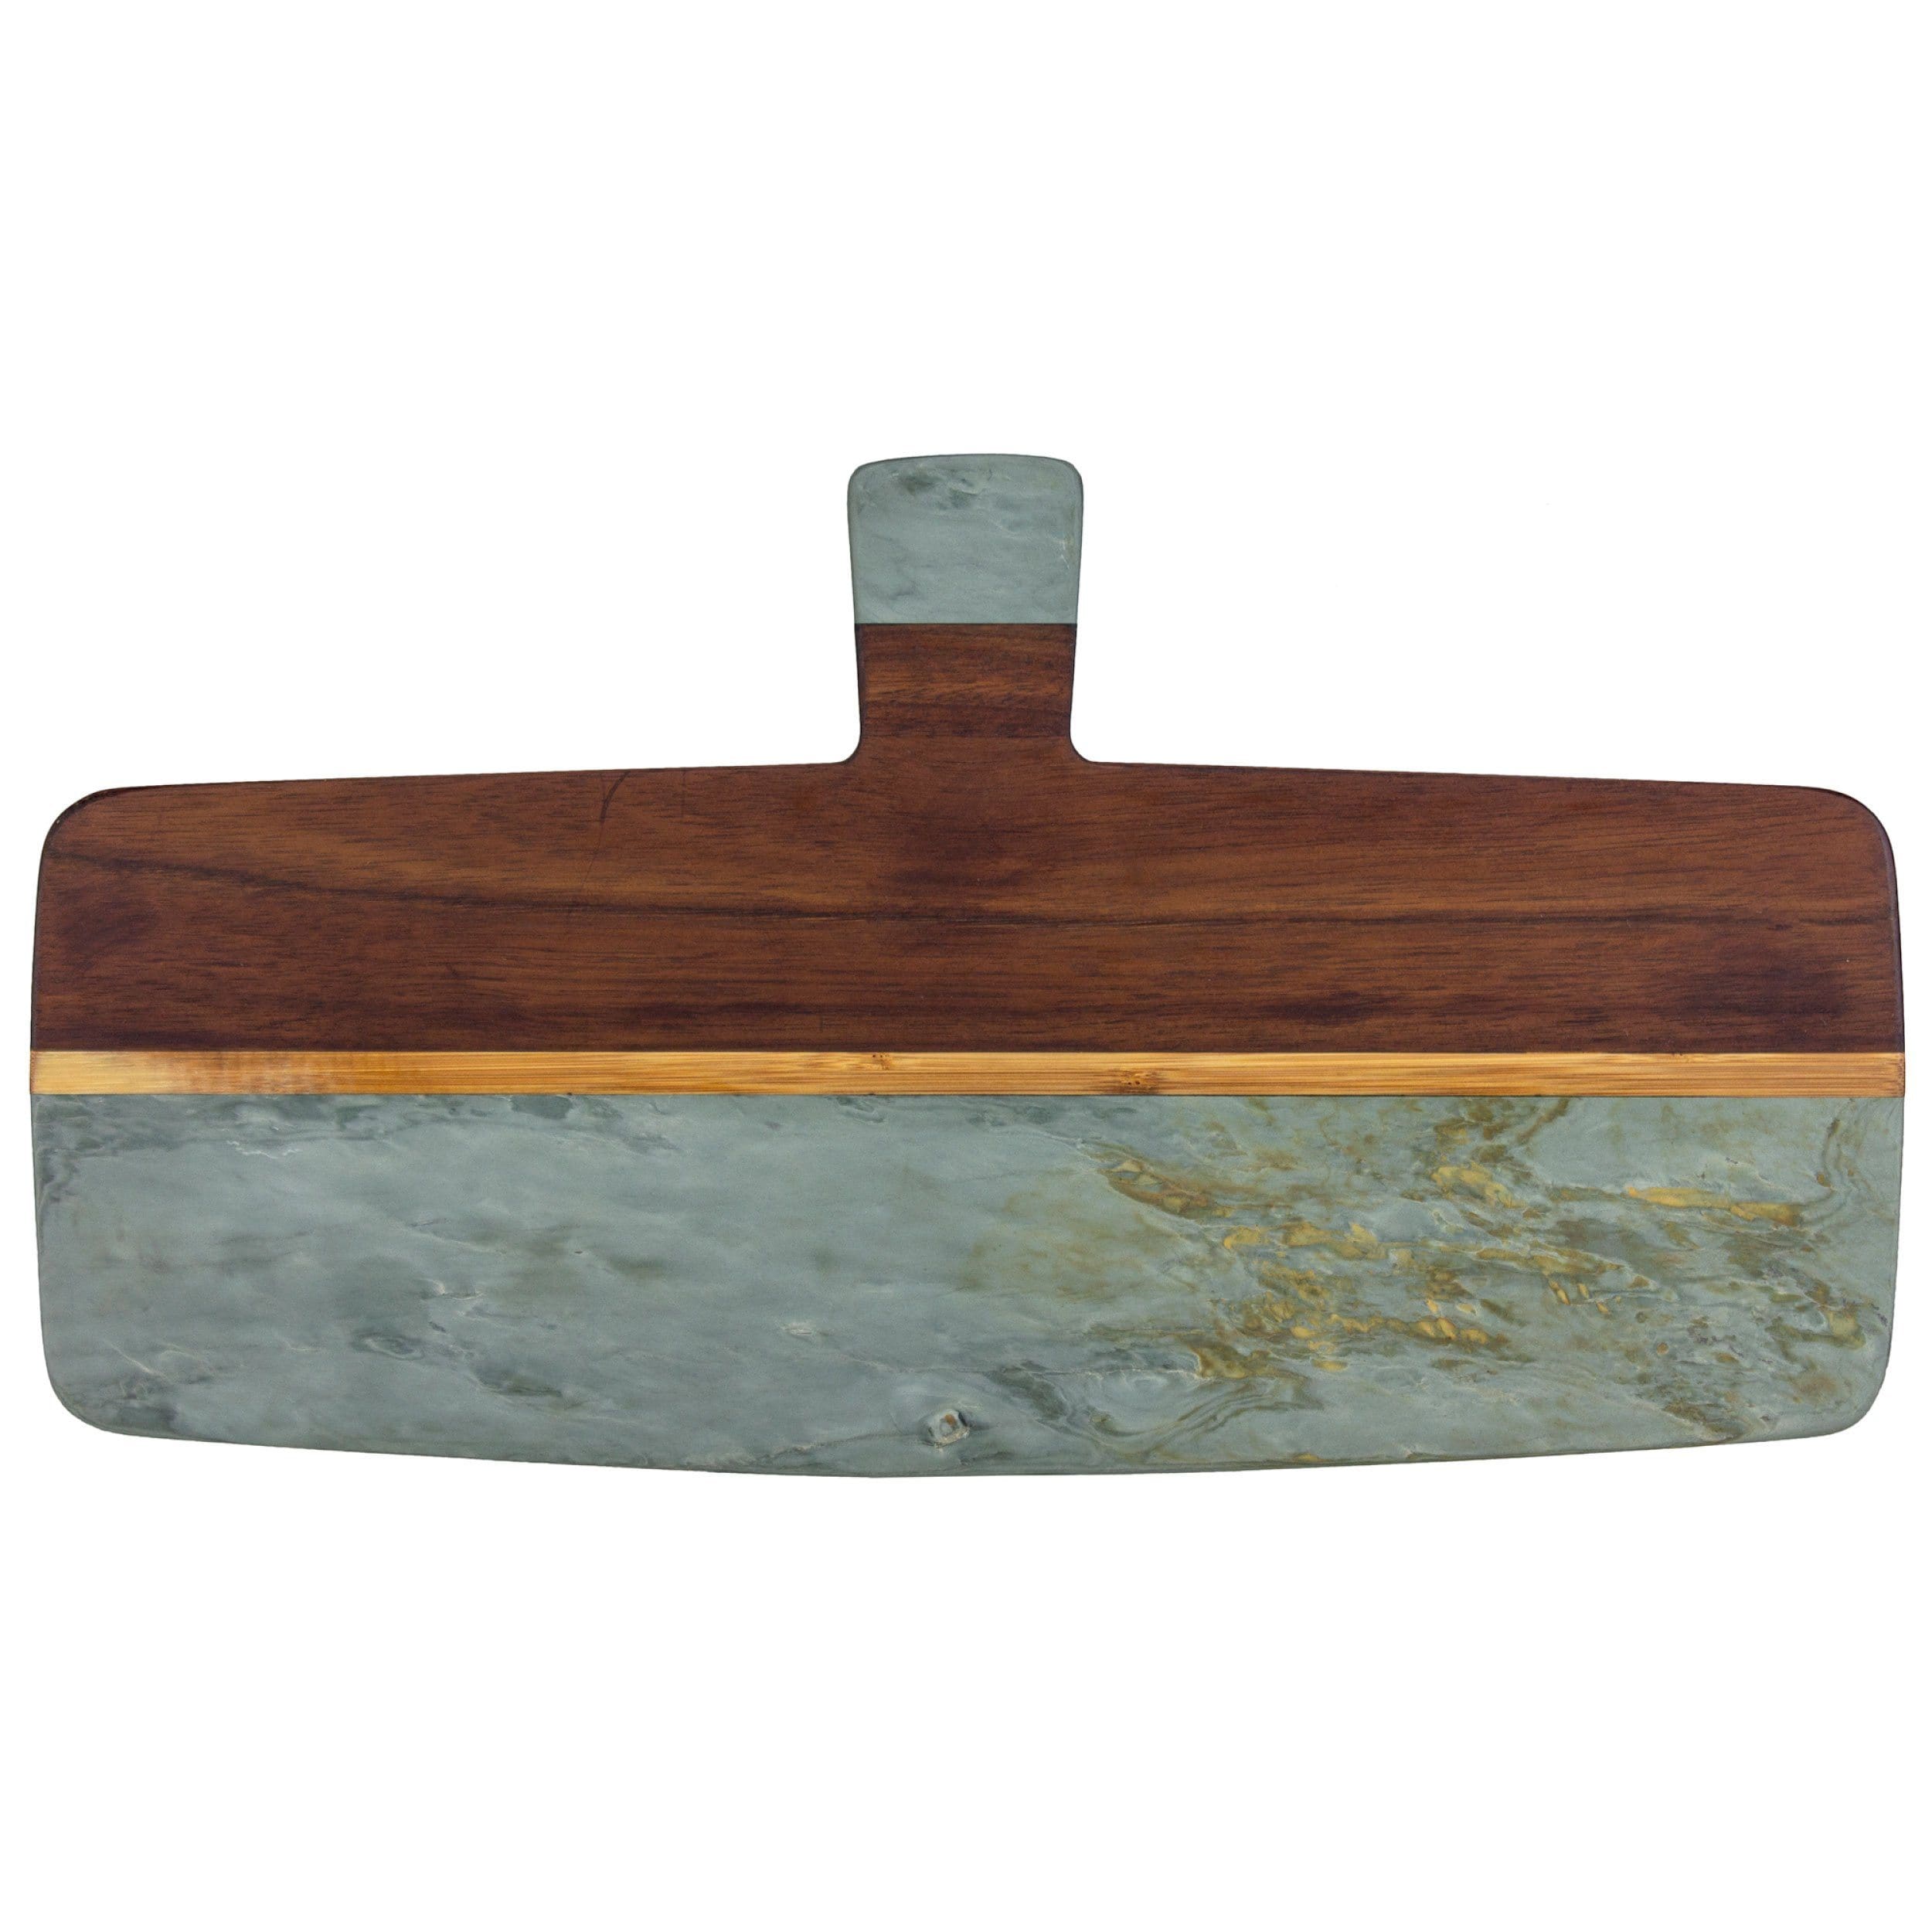 TOTALLY BAMBOO Rock & Branch® Series Slate and Acacia Serving Paddle, 17-7/8" x 9-7/8"